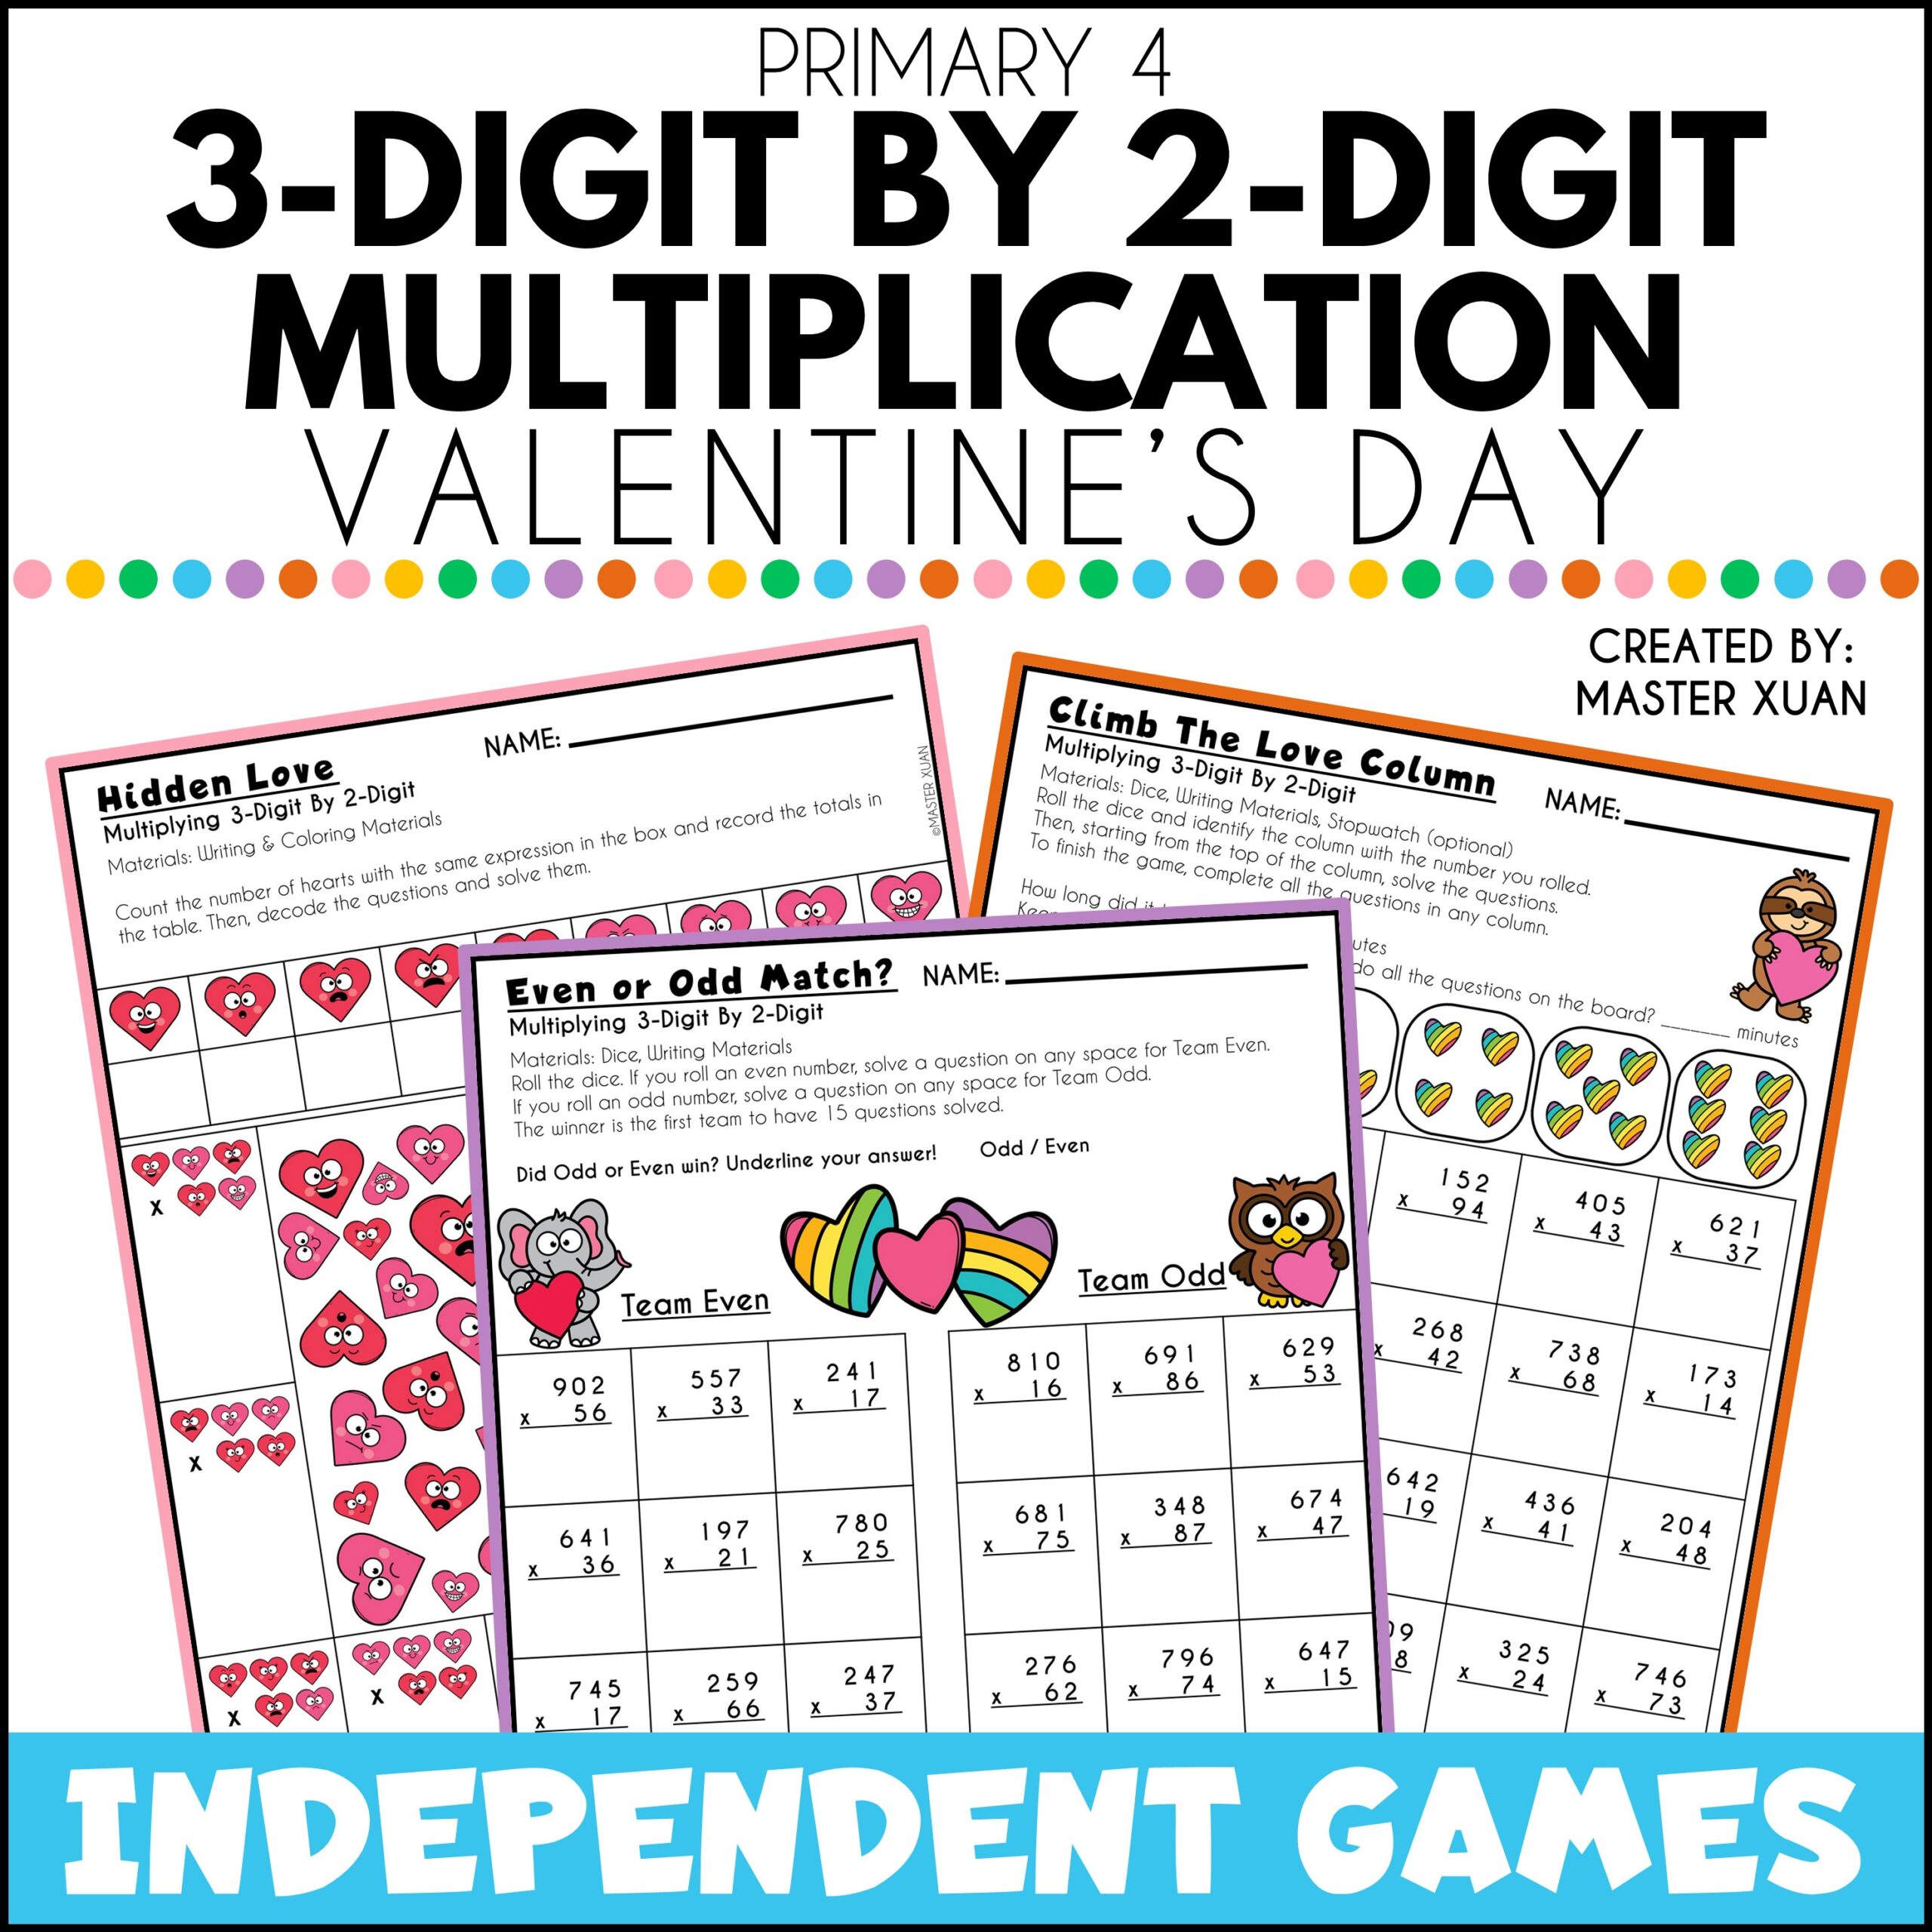 3 digit by 2 digit multiplication games are fun and engaging.